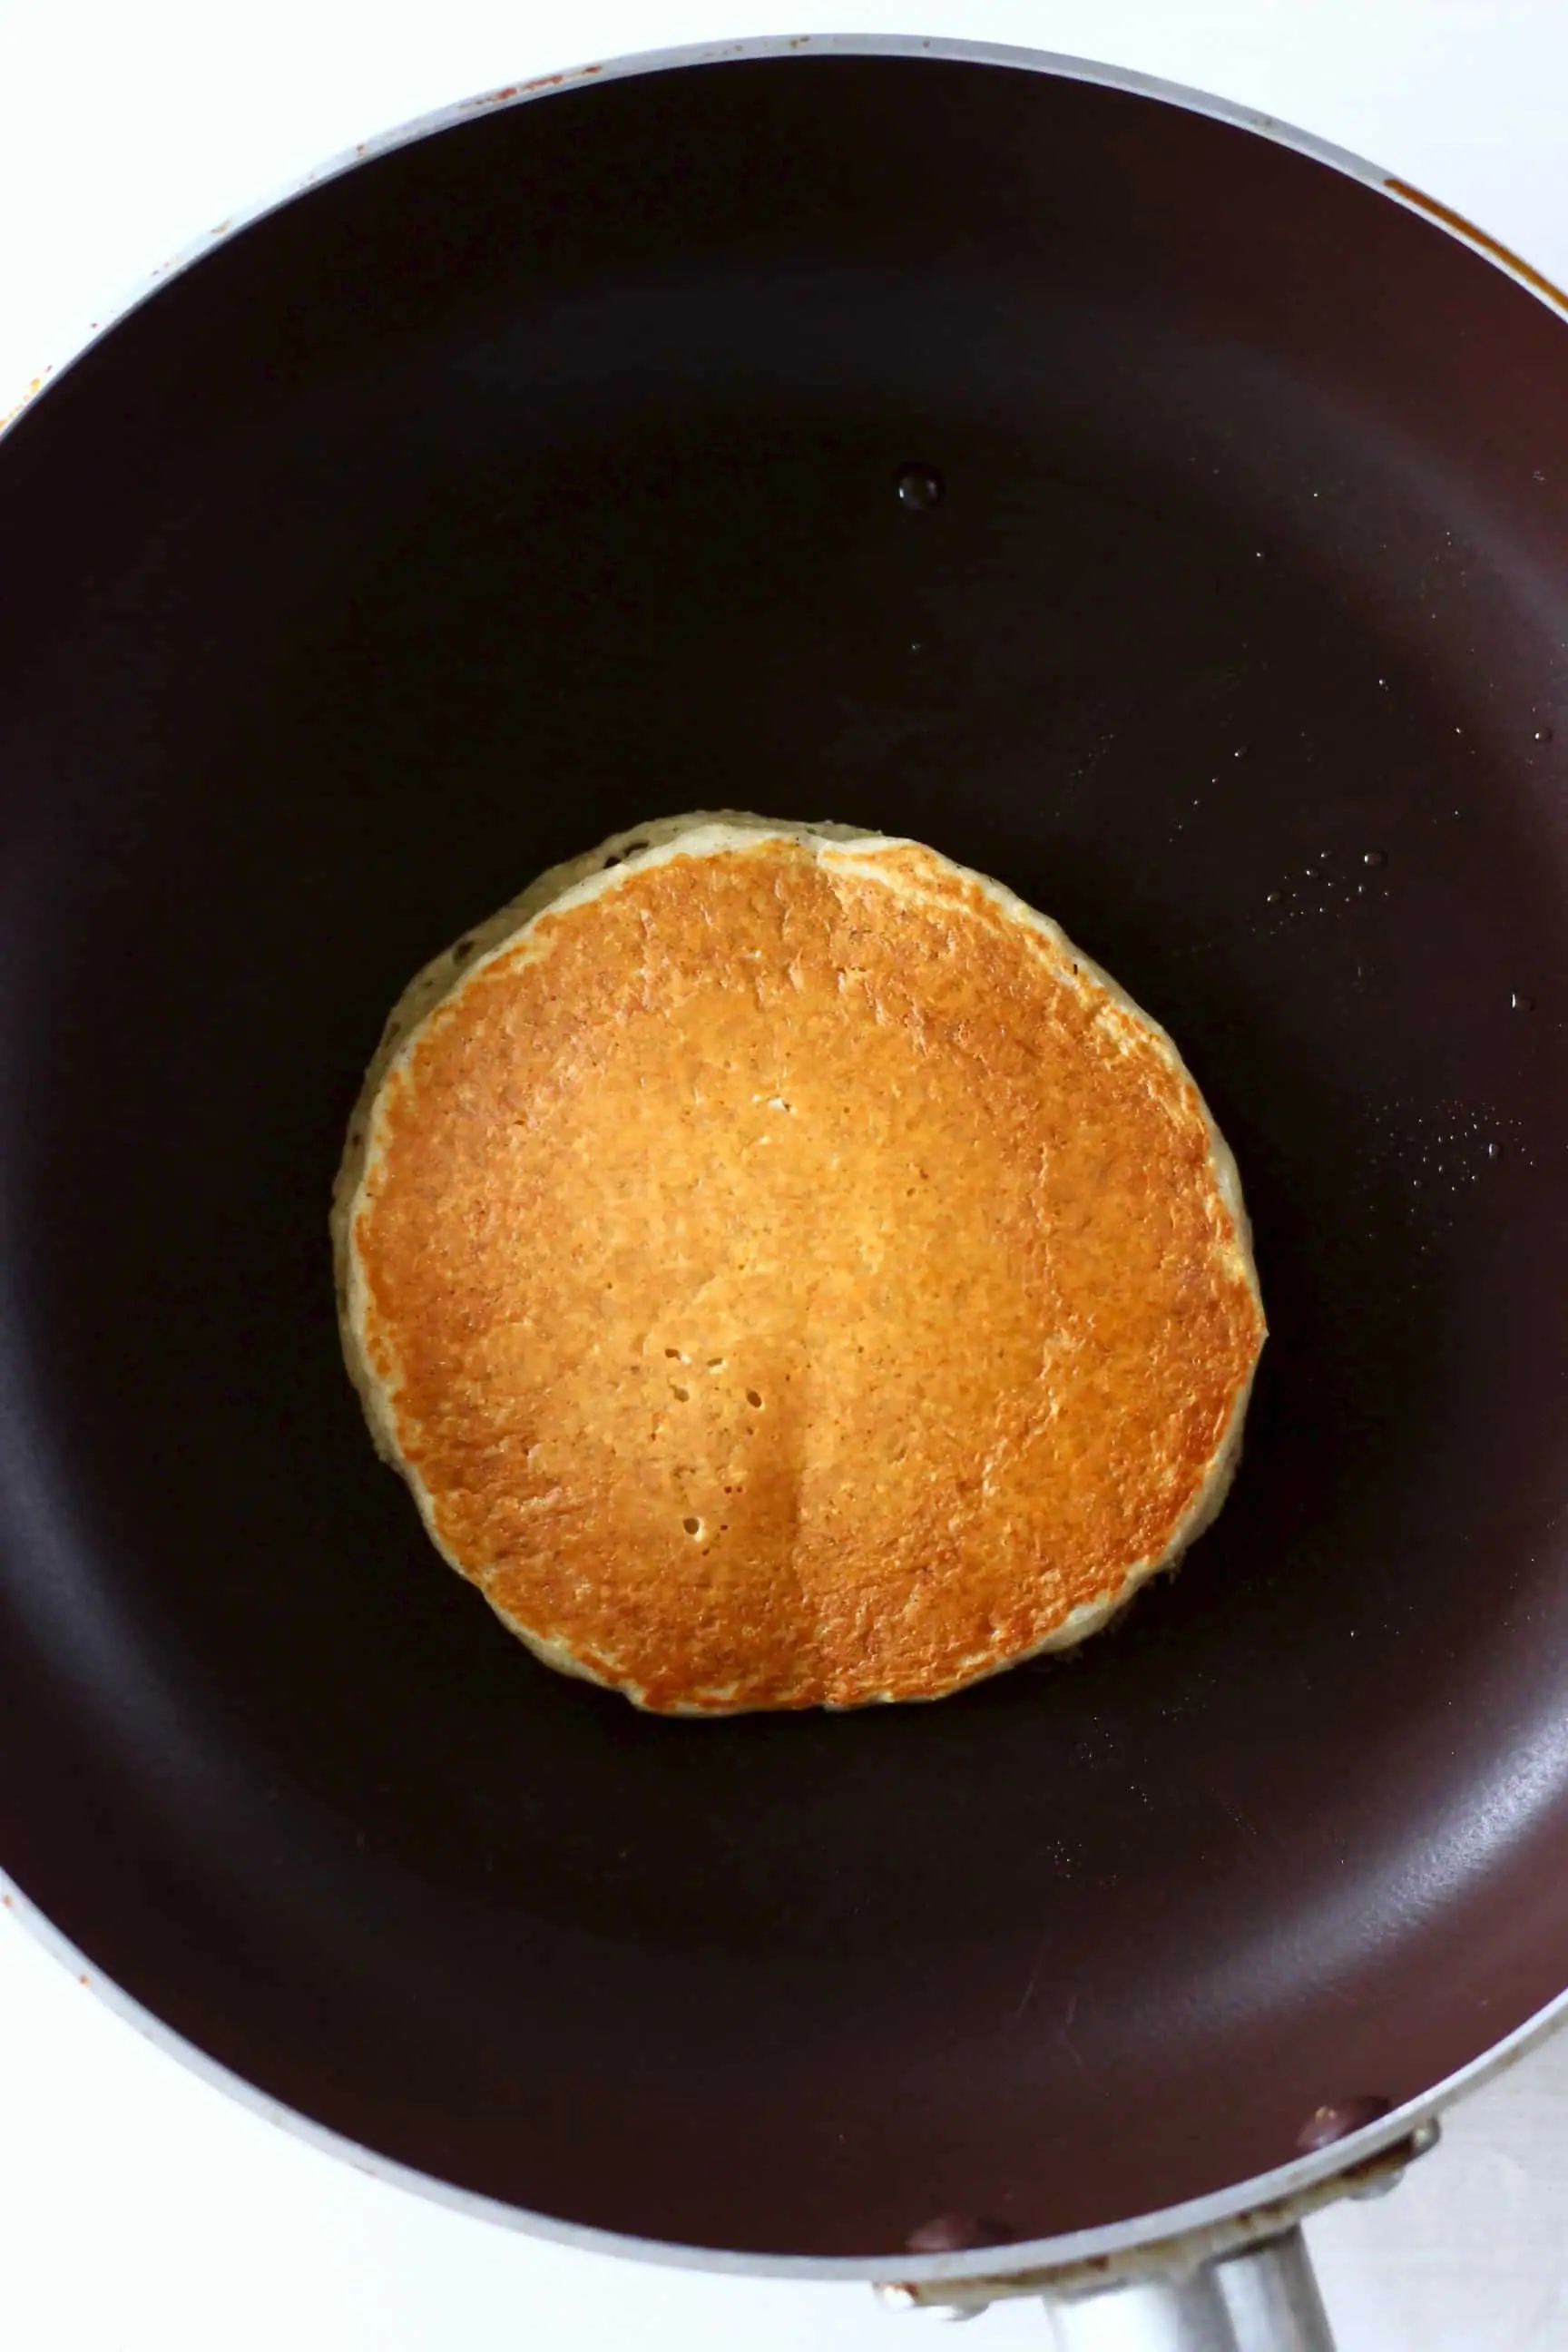 A golden brown oat flour pancake being cooked in a black frying pan against a marble background